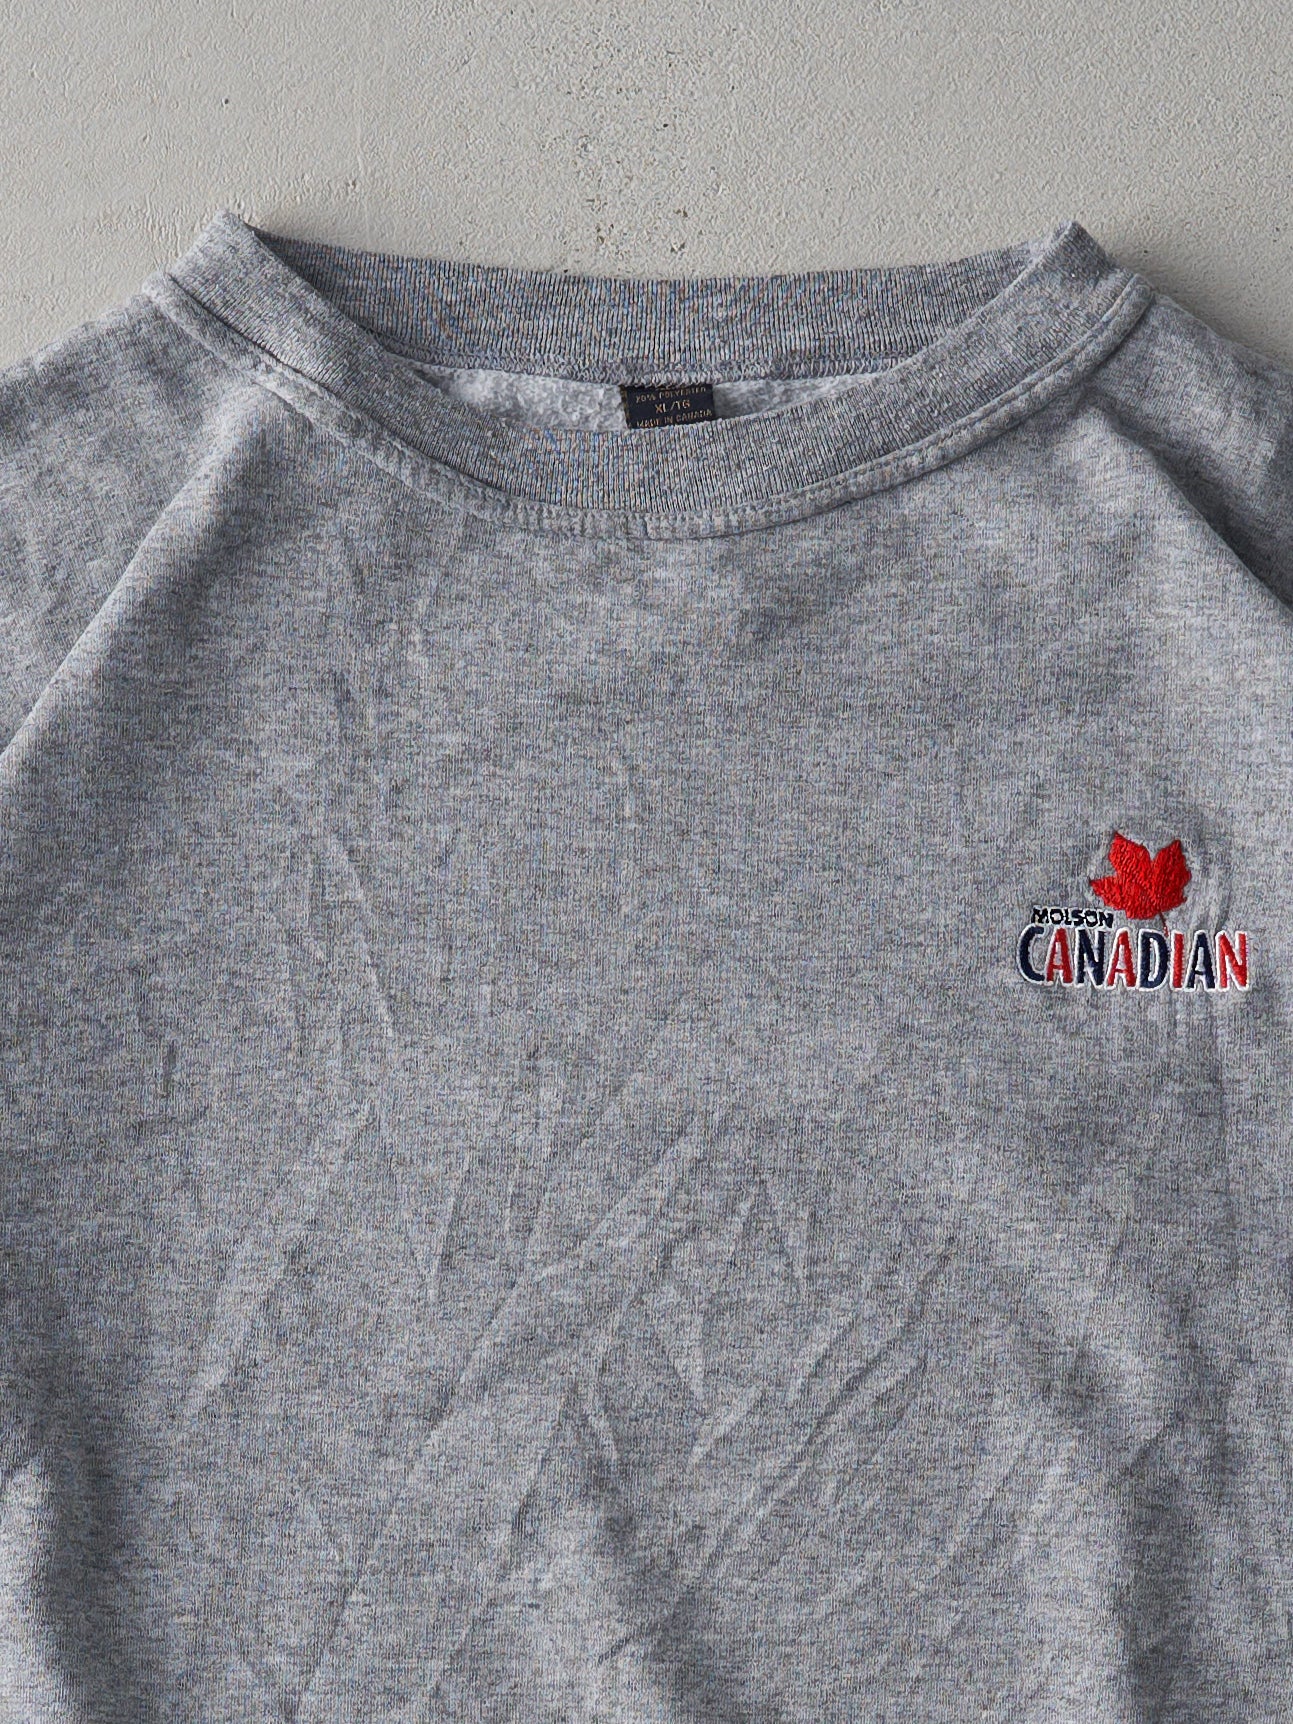 Vintage 90s Grey Embroidered Molson Canadian Cropped Crewneck (XL)